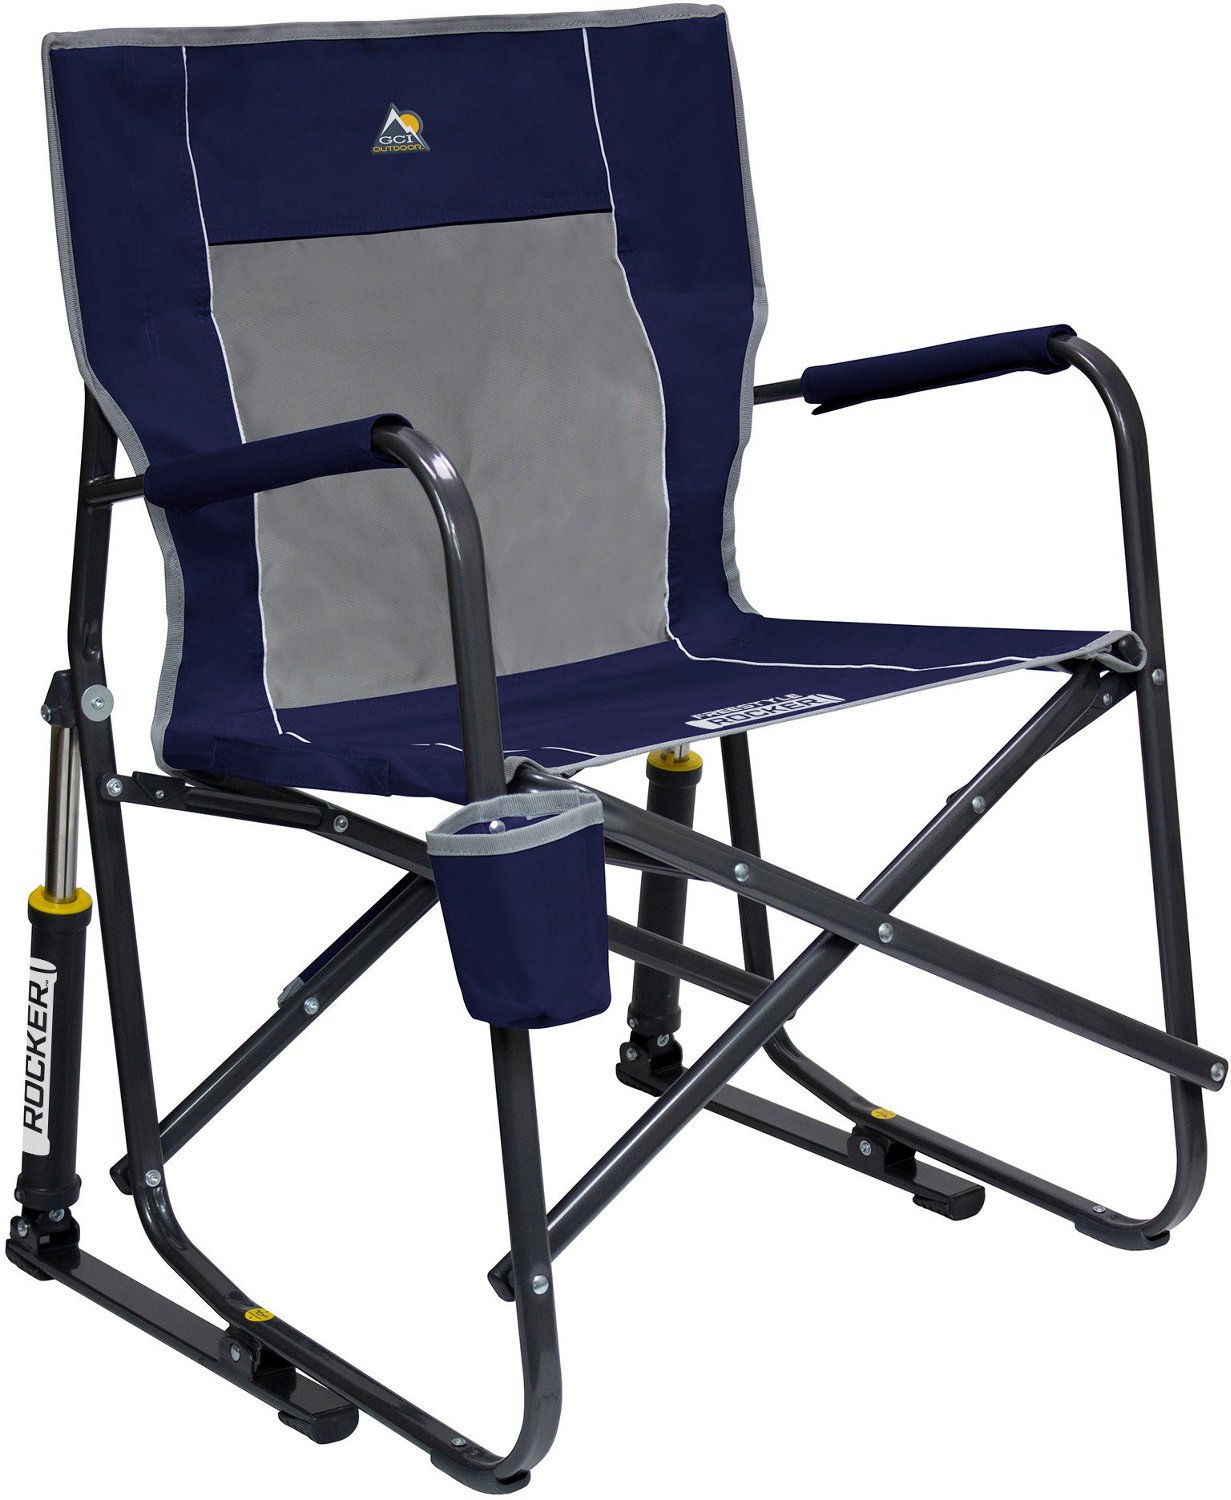 low profile lawn chairs academy